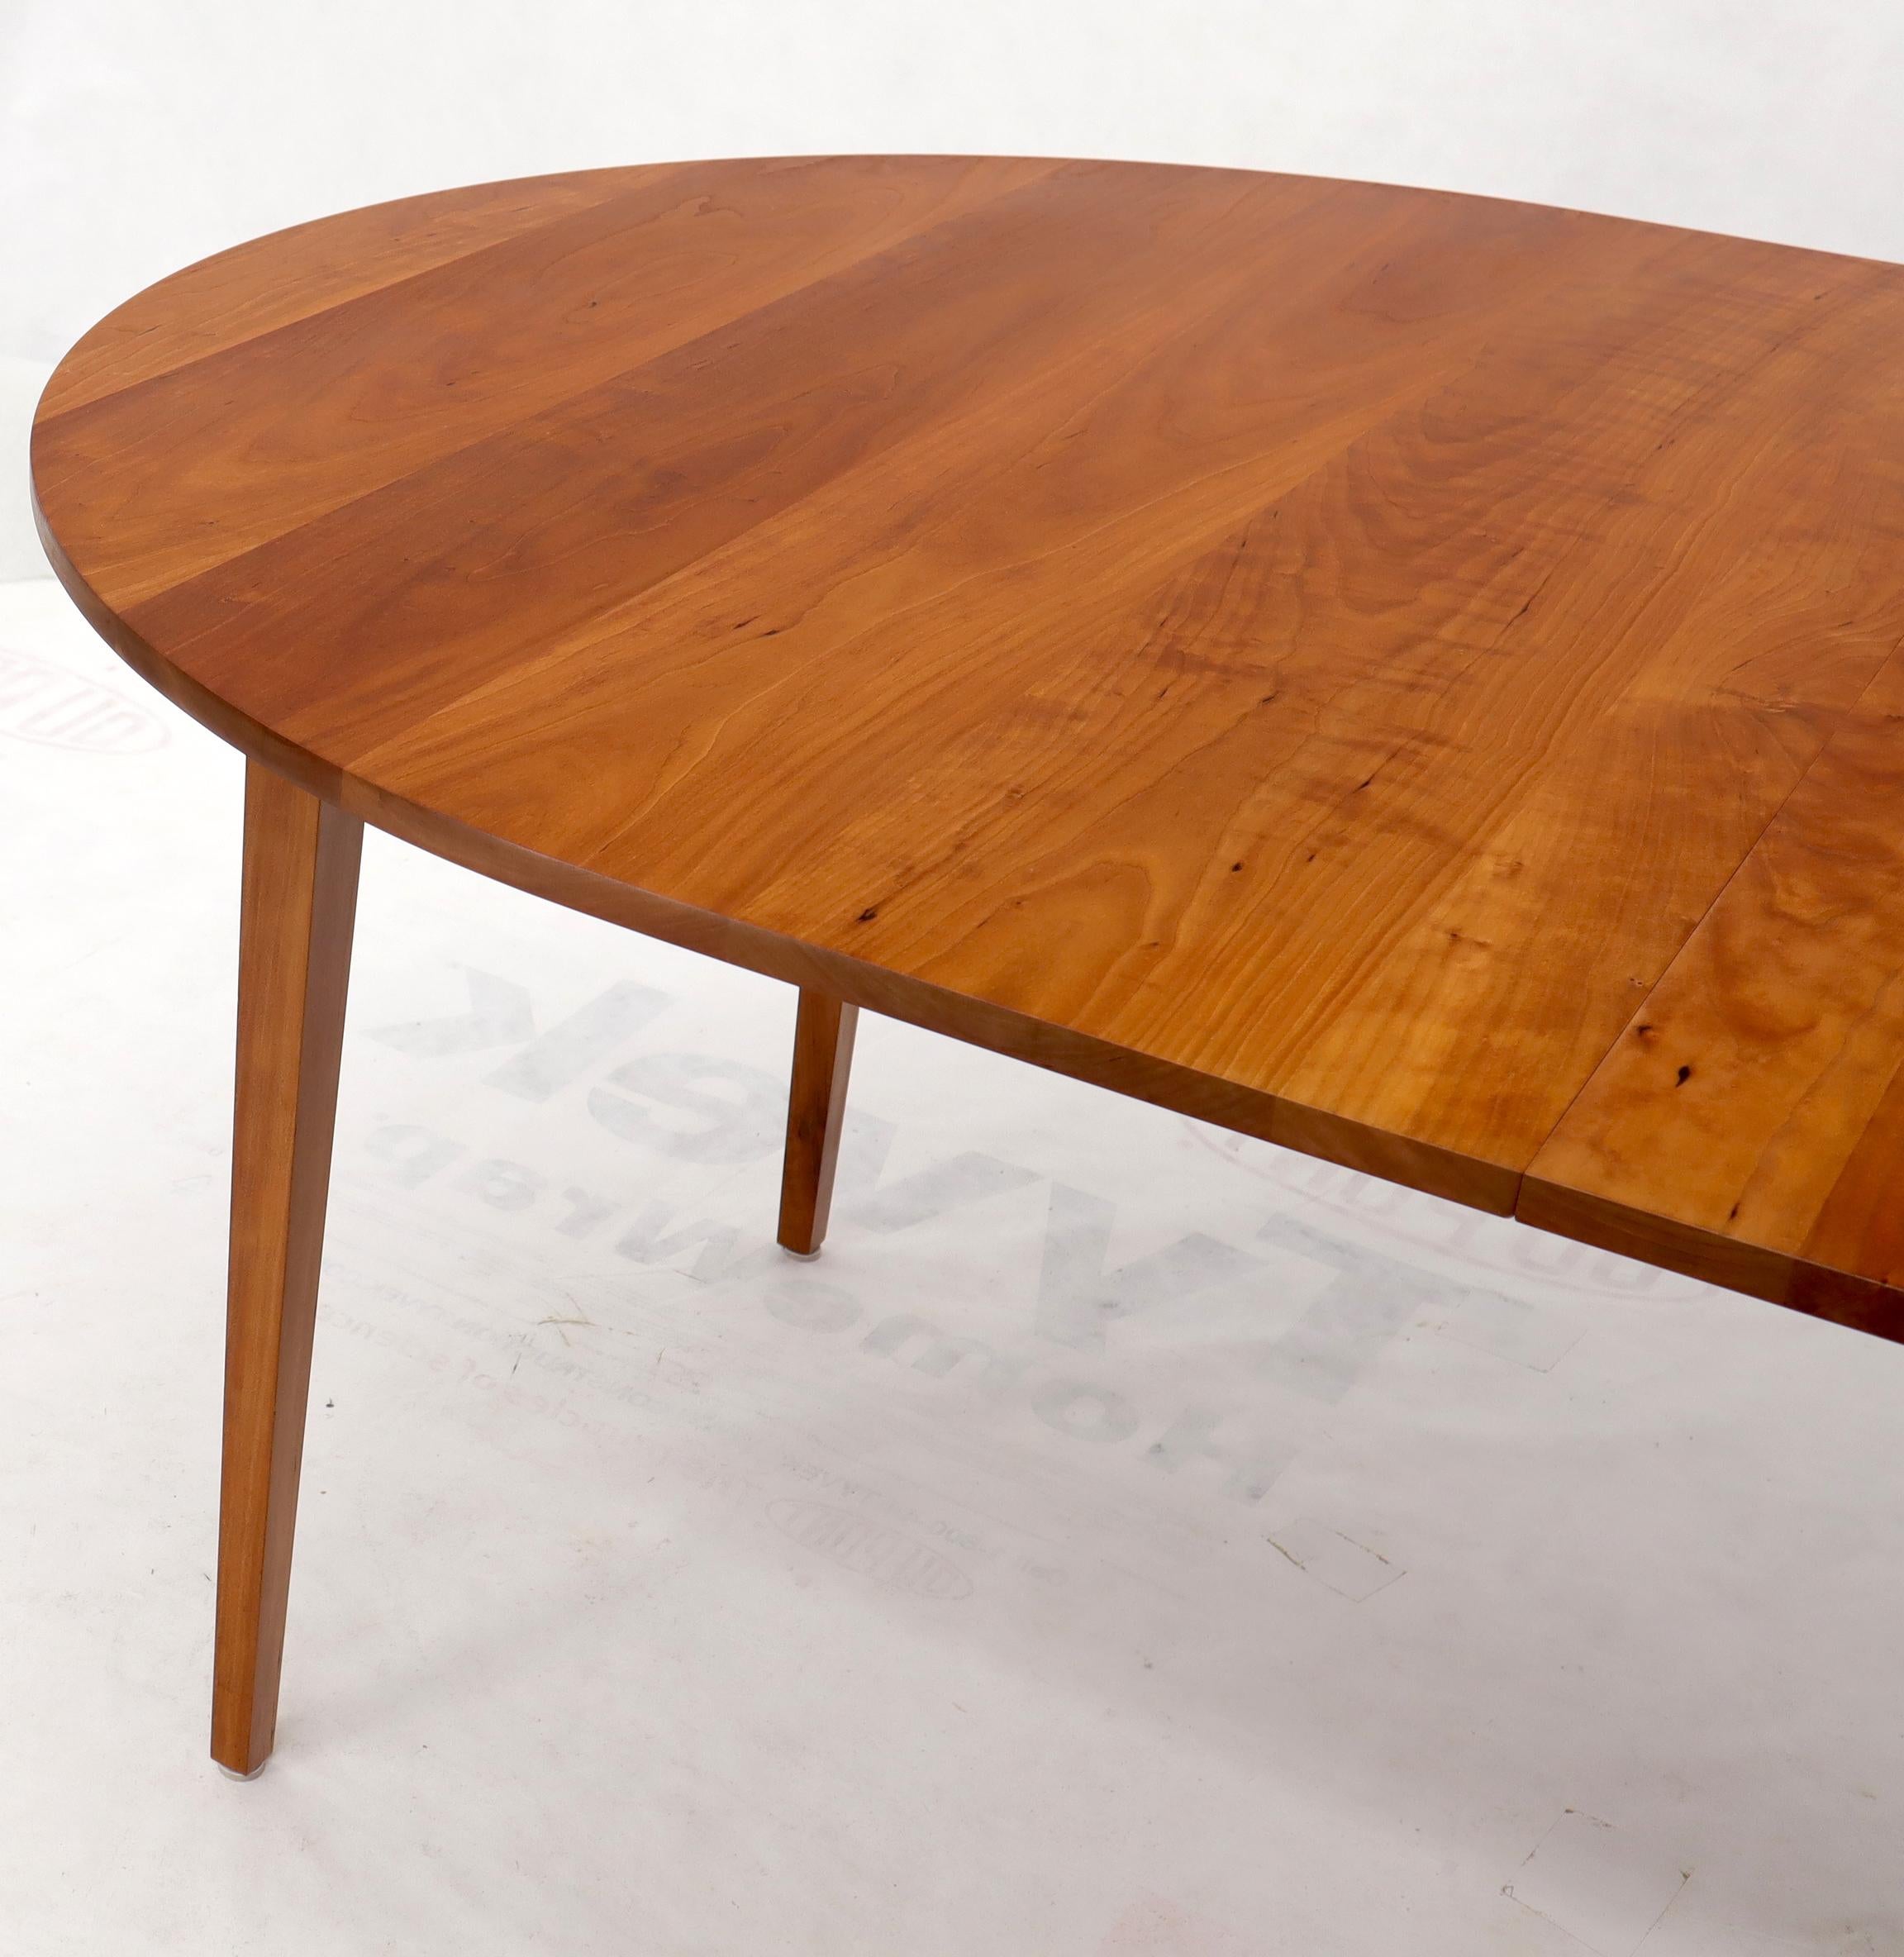 Mid-Century Modern Thomas Moser Signed Oval Solid Cherry Dining Table with One Leaf